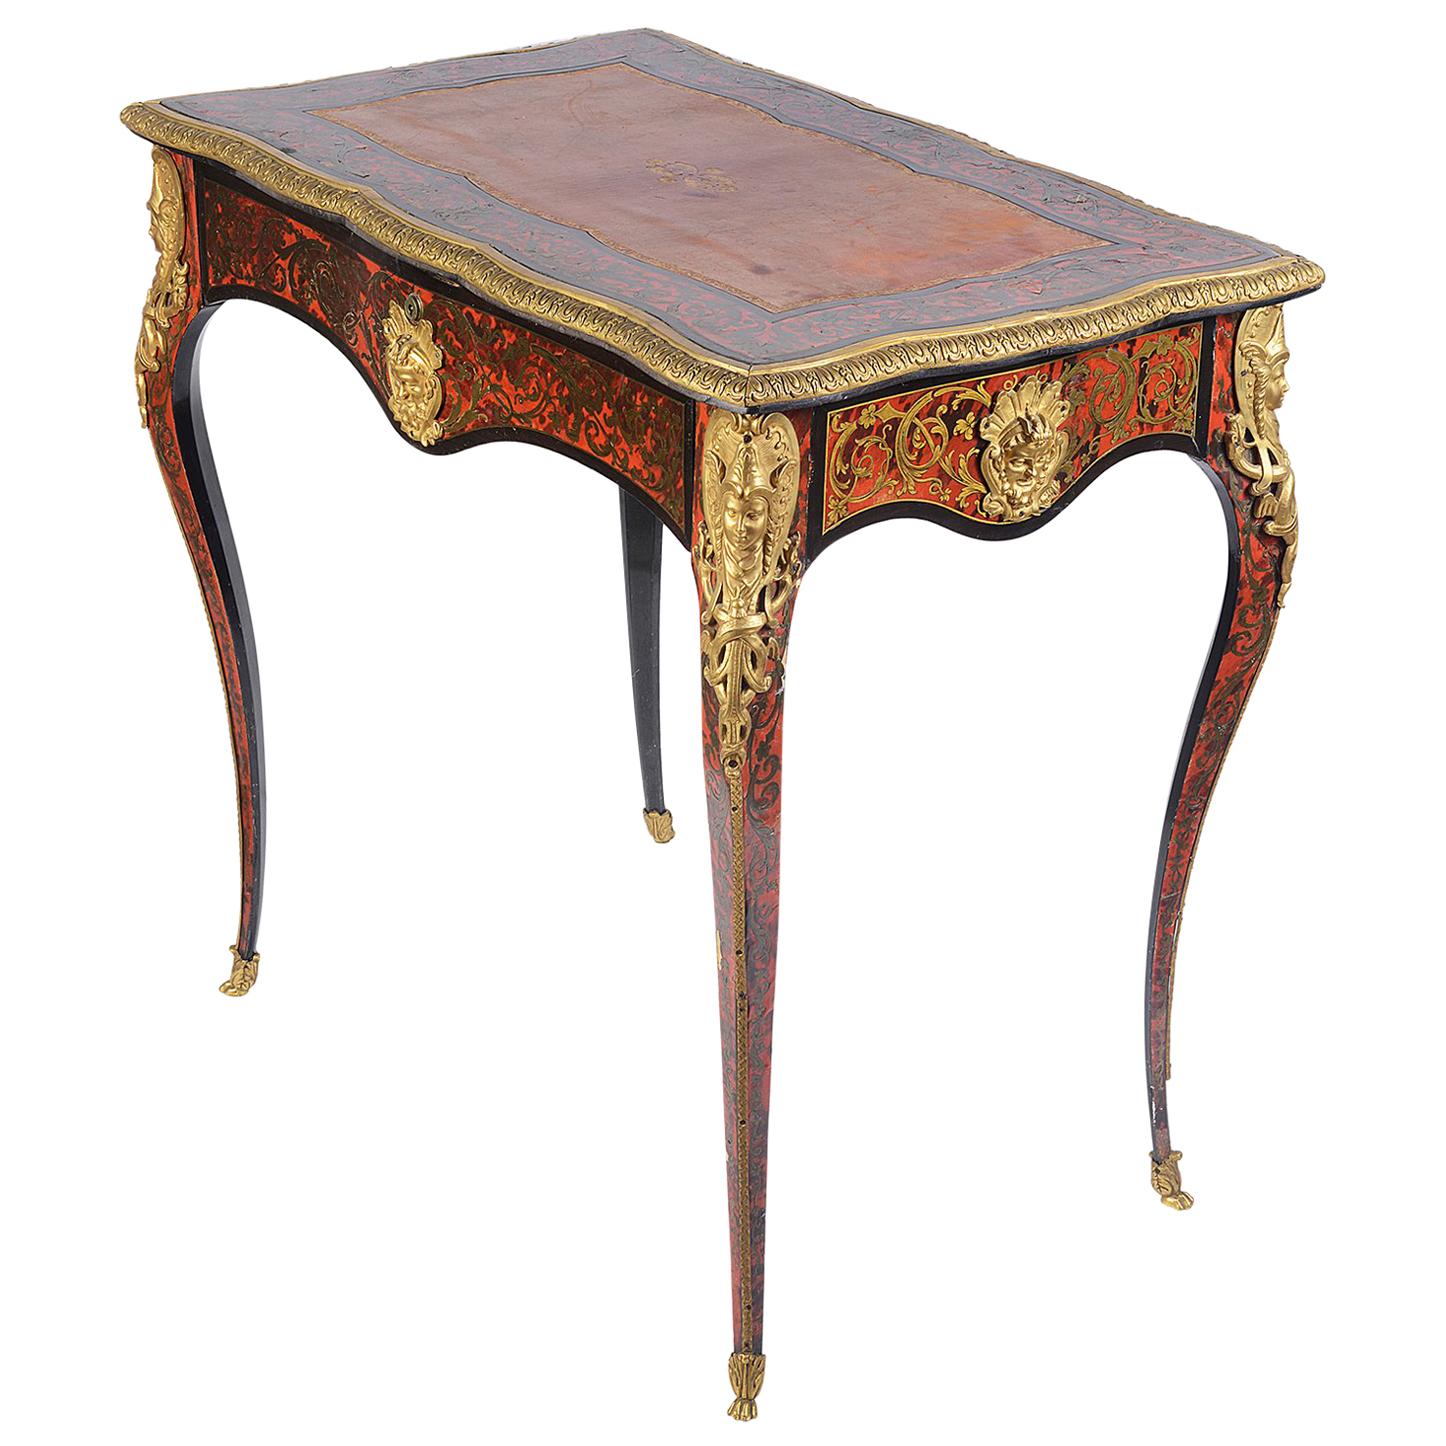 Small 19th Century French Boulle Bureau Plat